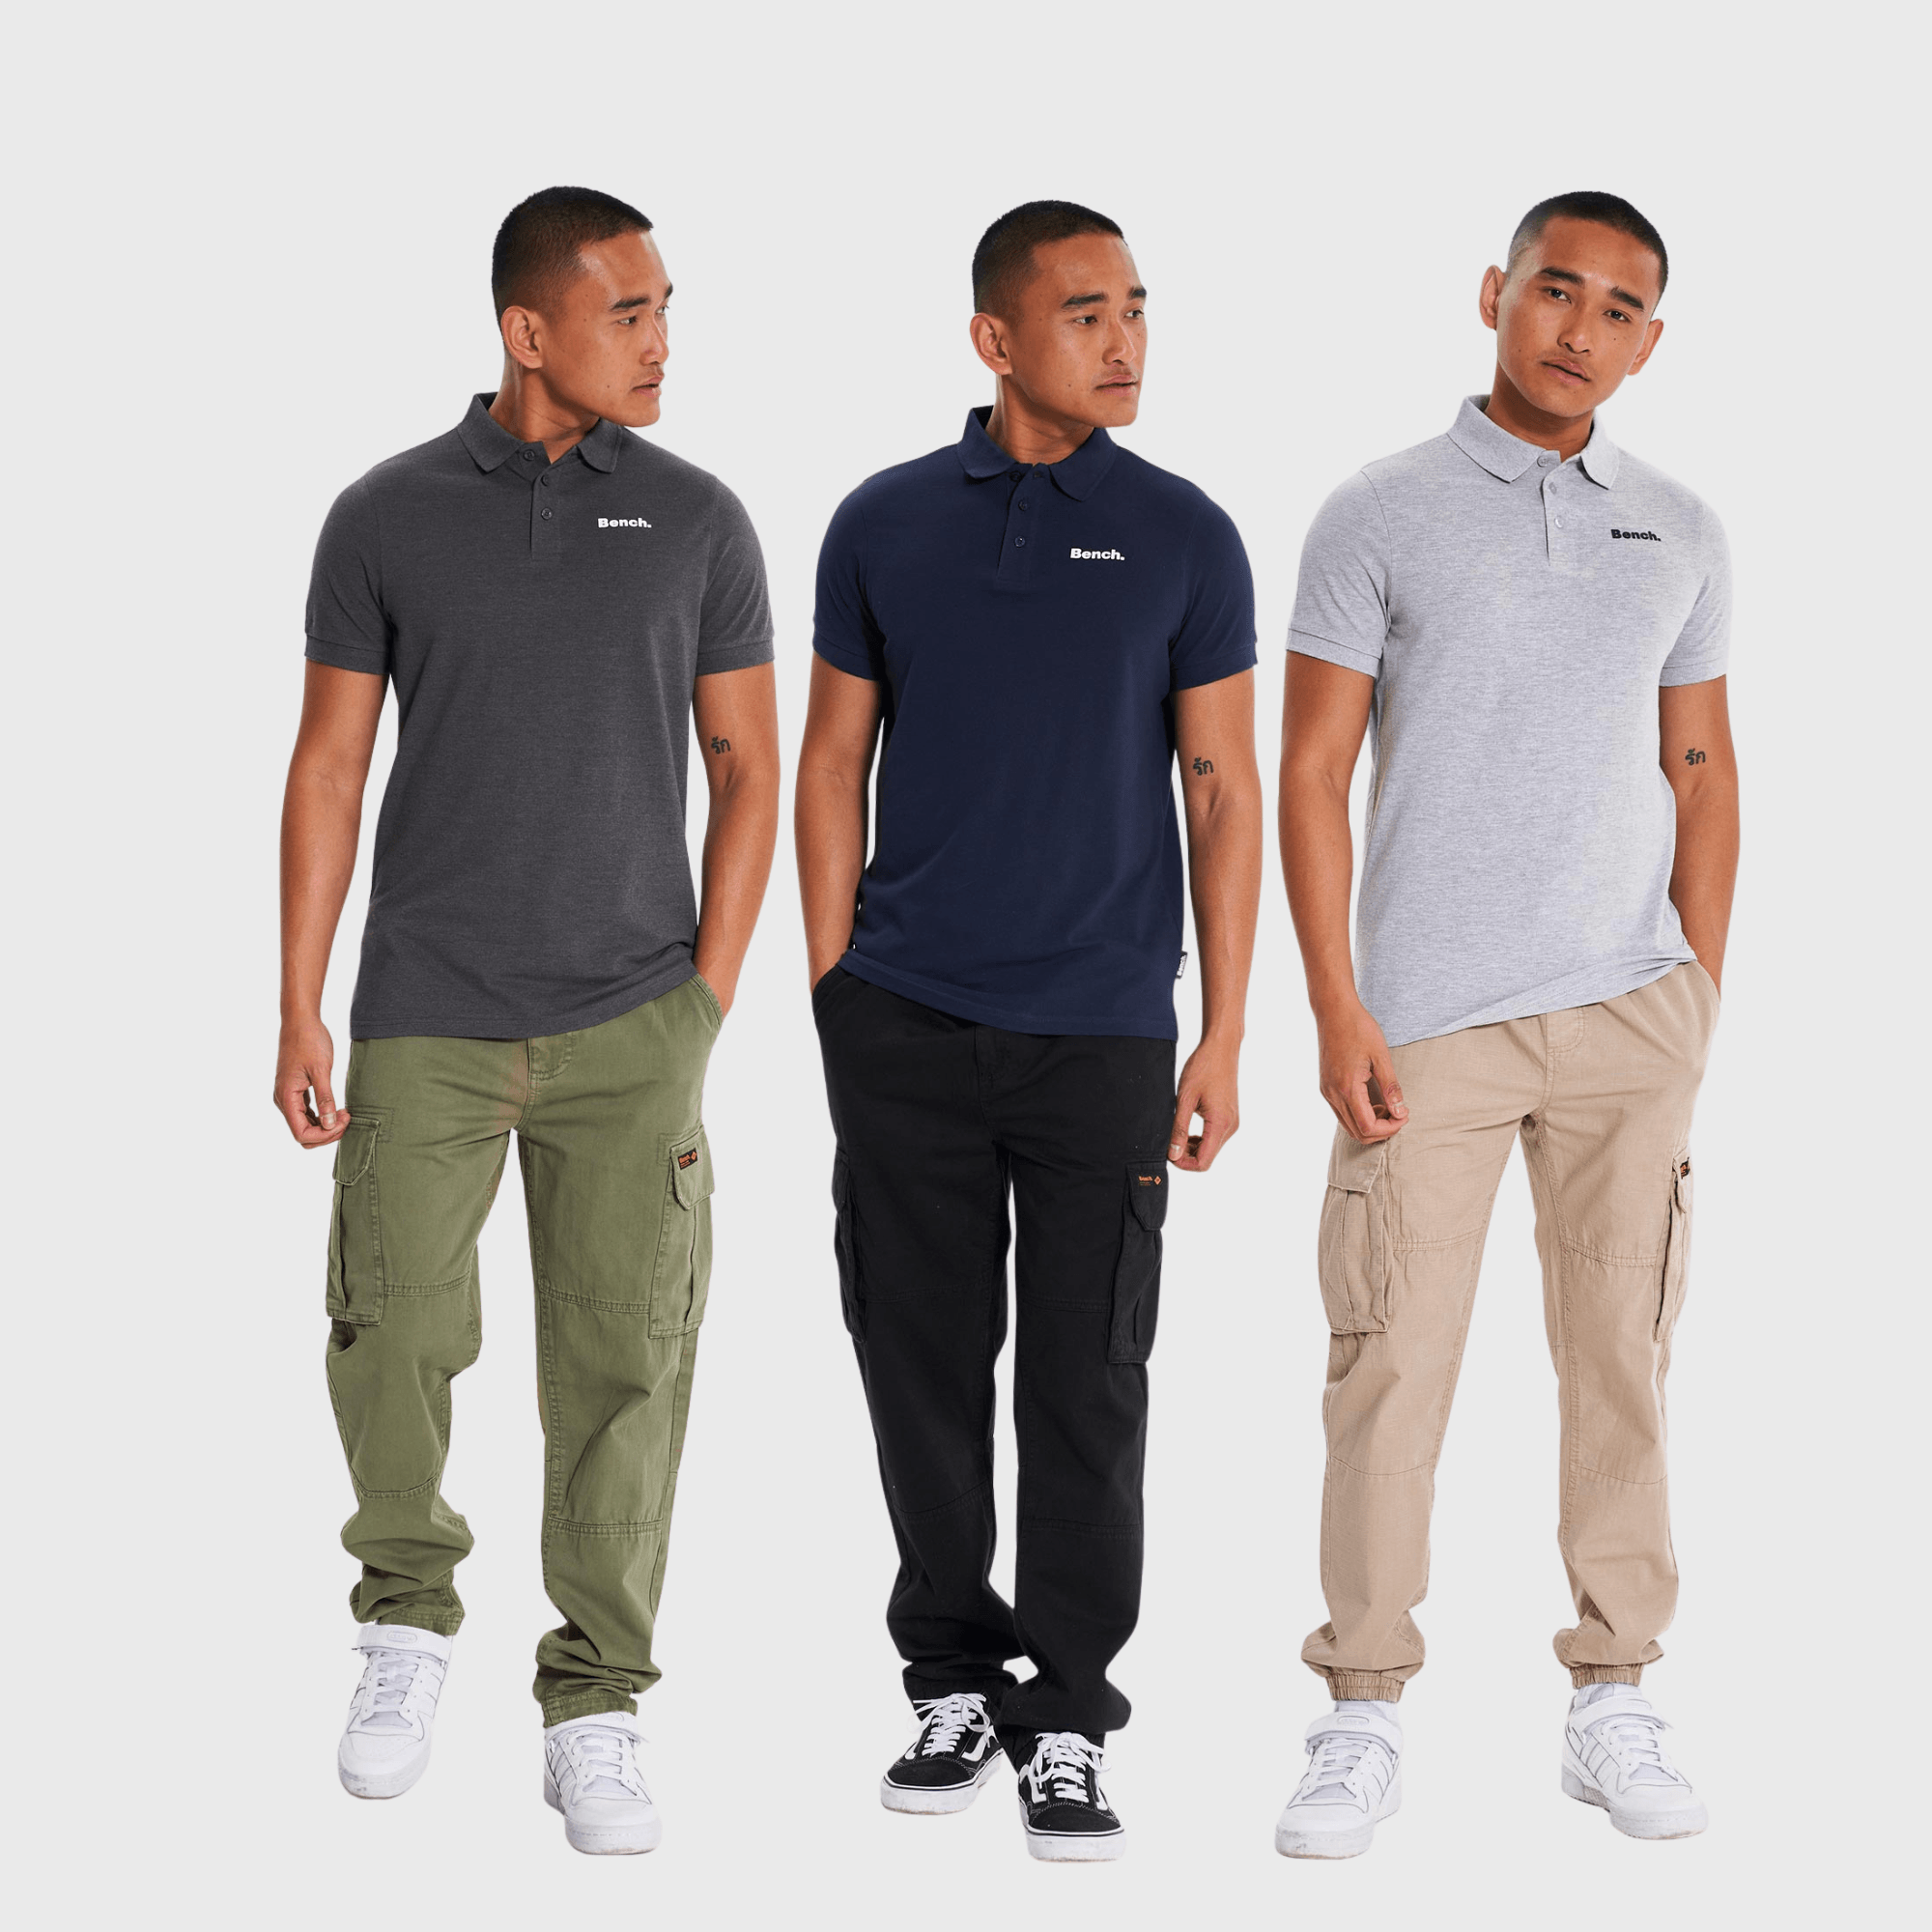 Mens ’BODE’ 3 Pack Polos - ASSORTED - S / Assorted